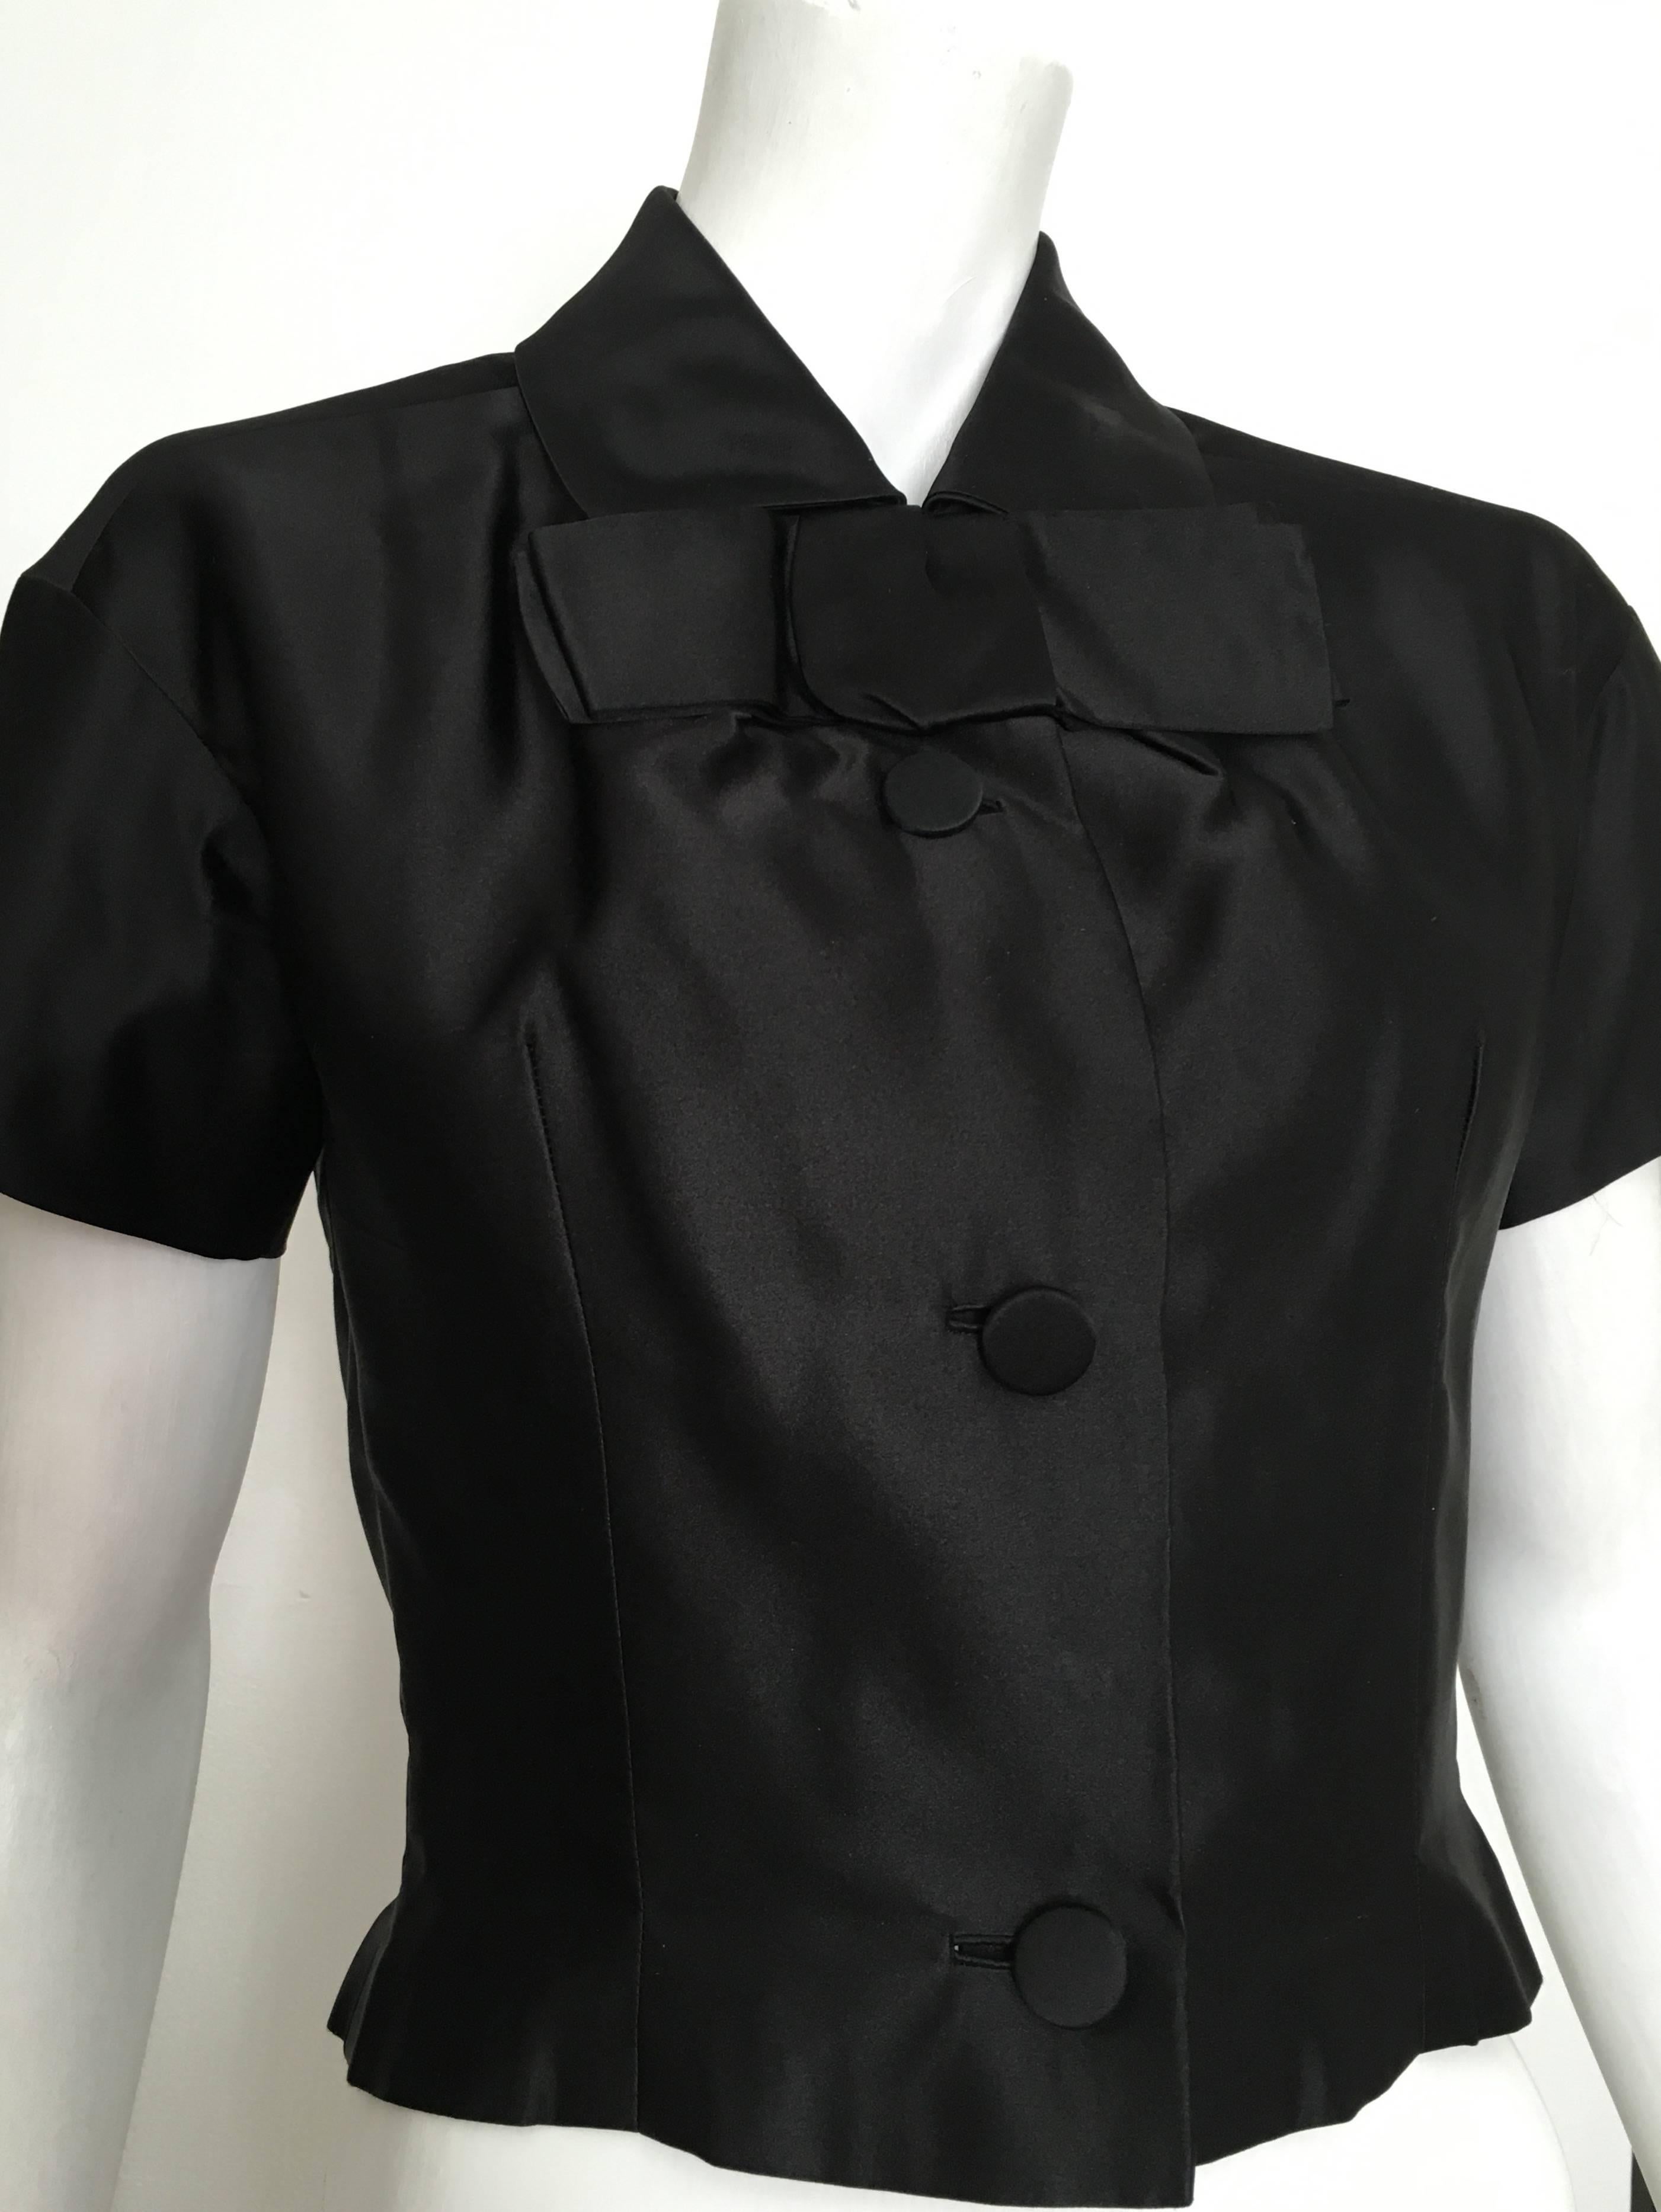 Christian Dior - New York 1950s black evening short sleeve silk blouse is a size 4. Ladies for this vintage treasure I urge you to please use your measuring tape so you can properly measure your bust & waist to make sure this will fit you the way